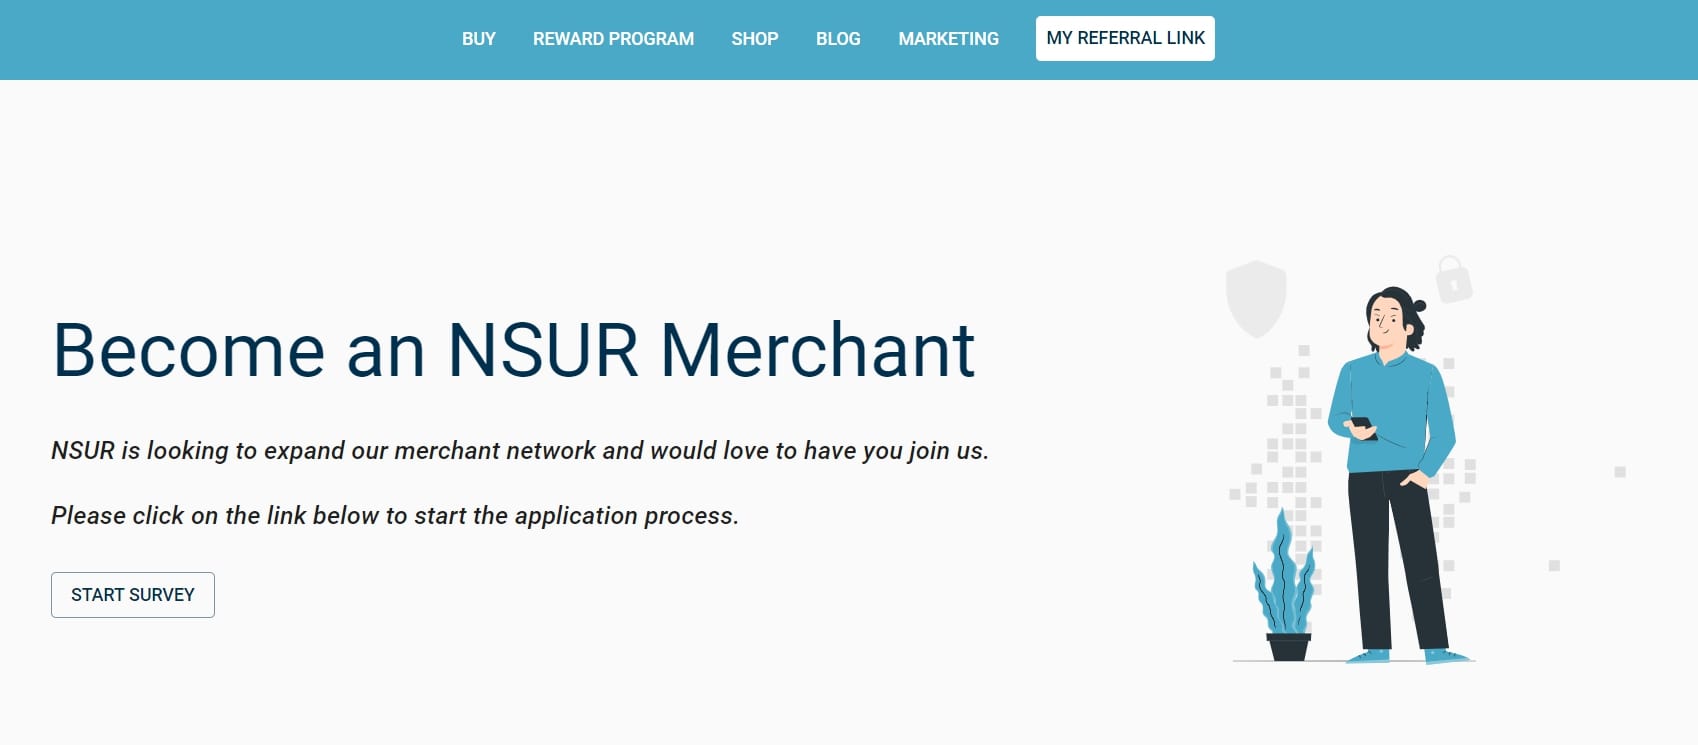 How To Apply to Become a Merchant at the National Student Shopping Network